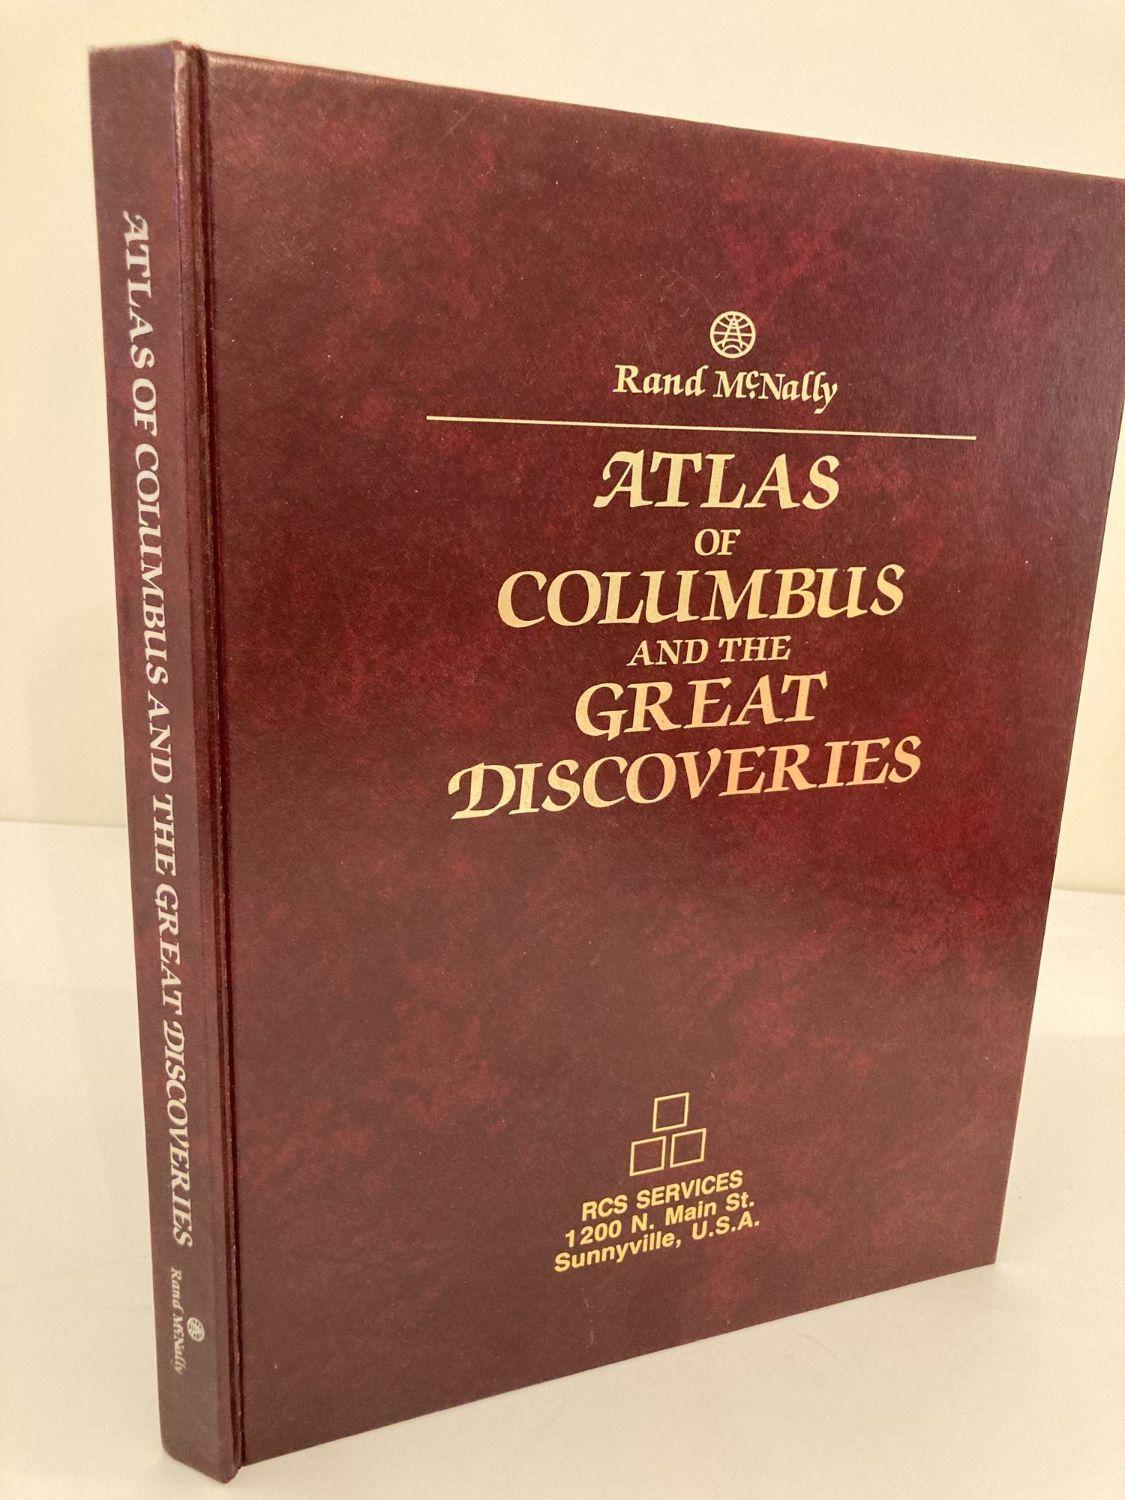 Atlas of Columbus and the Great Discoveries - Celebrating the 500th Anniversary of the Discovery of America
Nebenzahl, Kenneth
Published by Rand McNally (1990)
Format: 168 pages, Hardcover.
Language: English.
Edition: First American